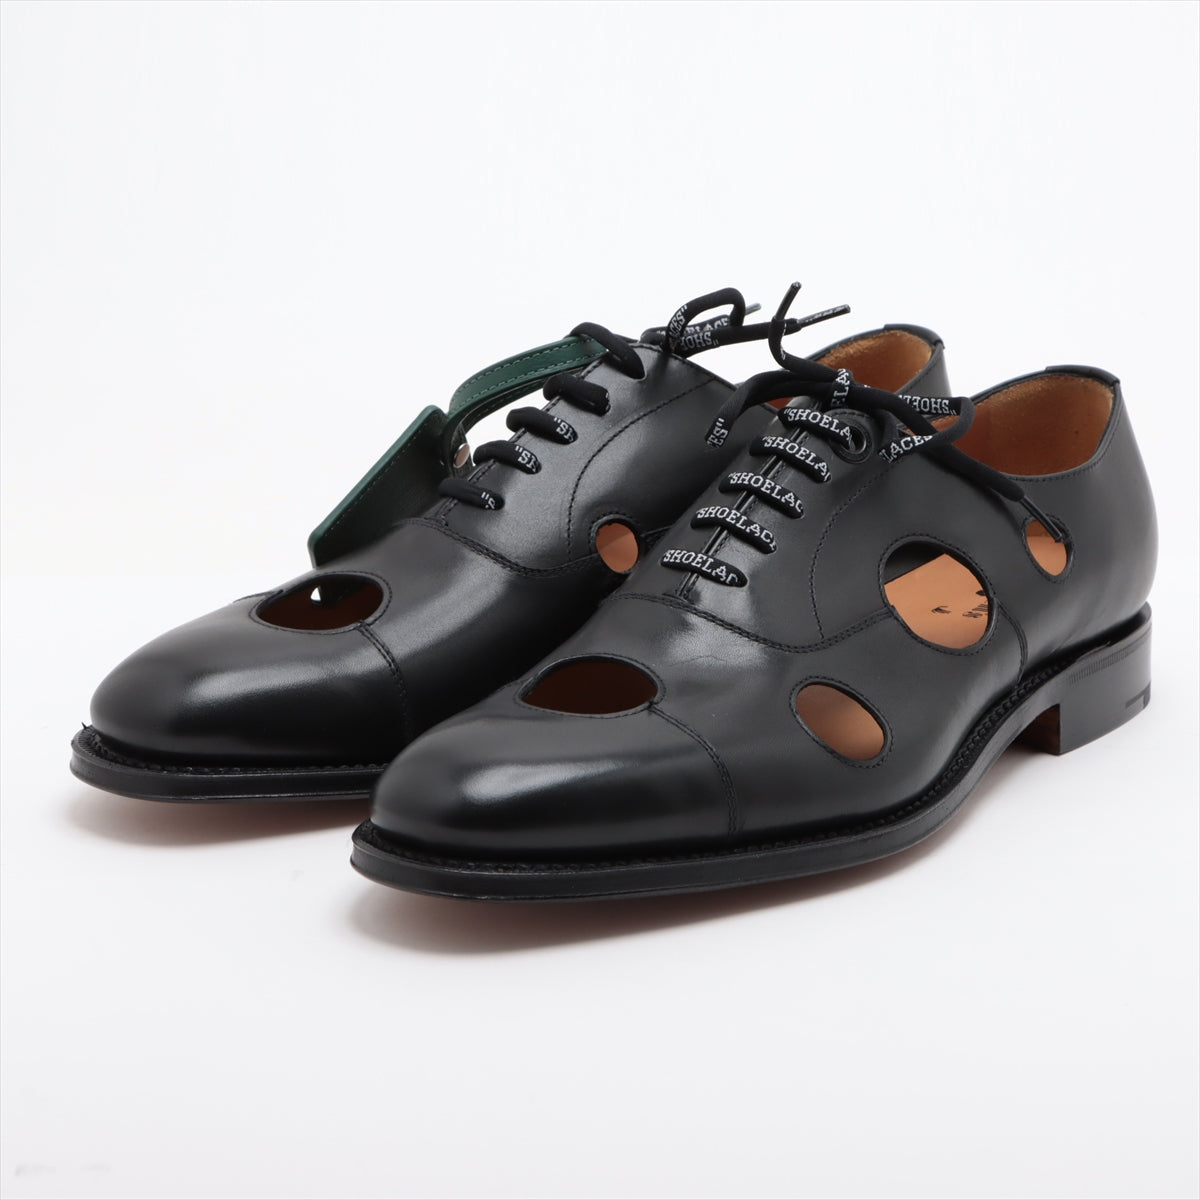 Church x off-white Leather Leather shoes 9 1/2 Men's Black Consulting Meteor Straight tip  Is there a replacement string